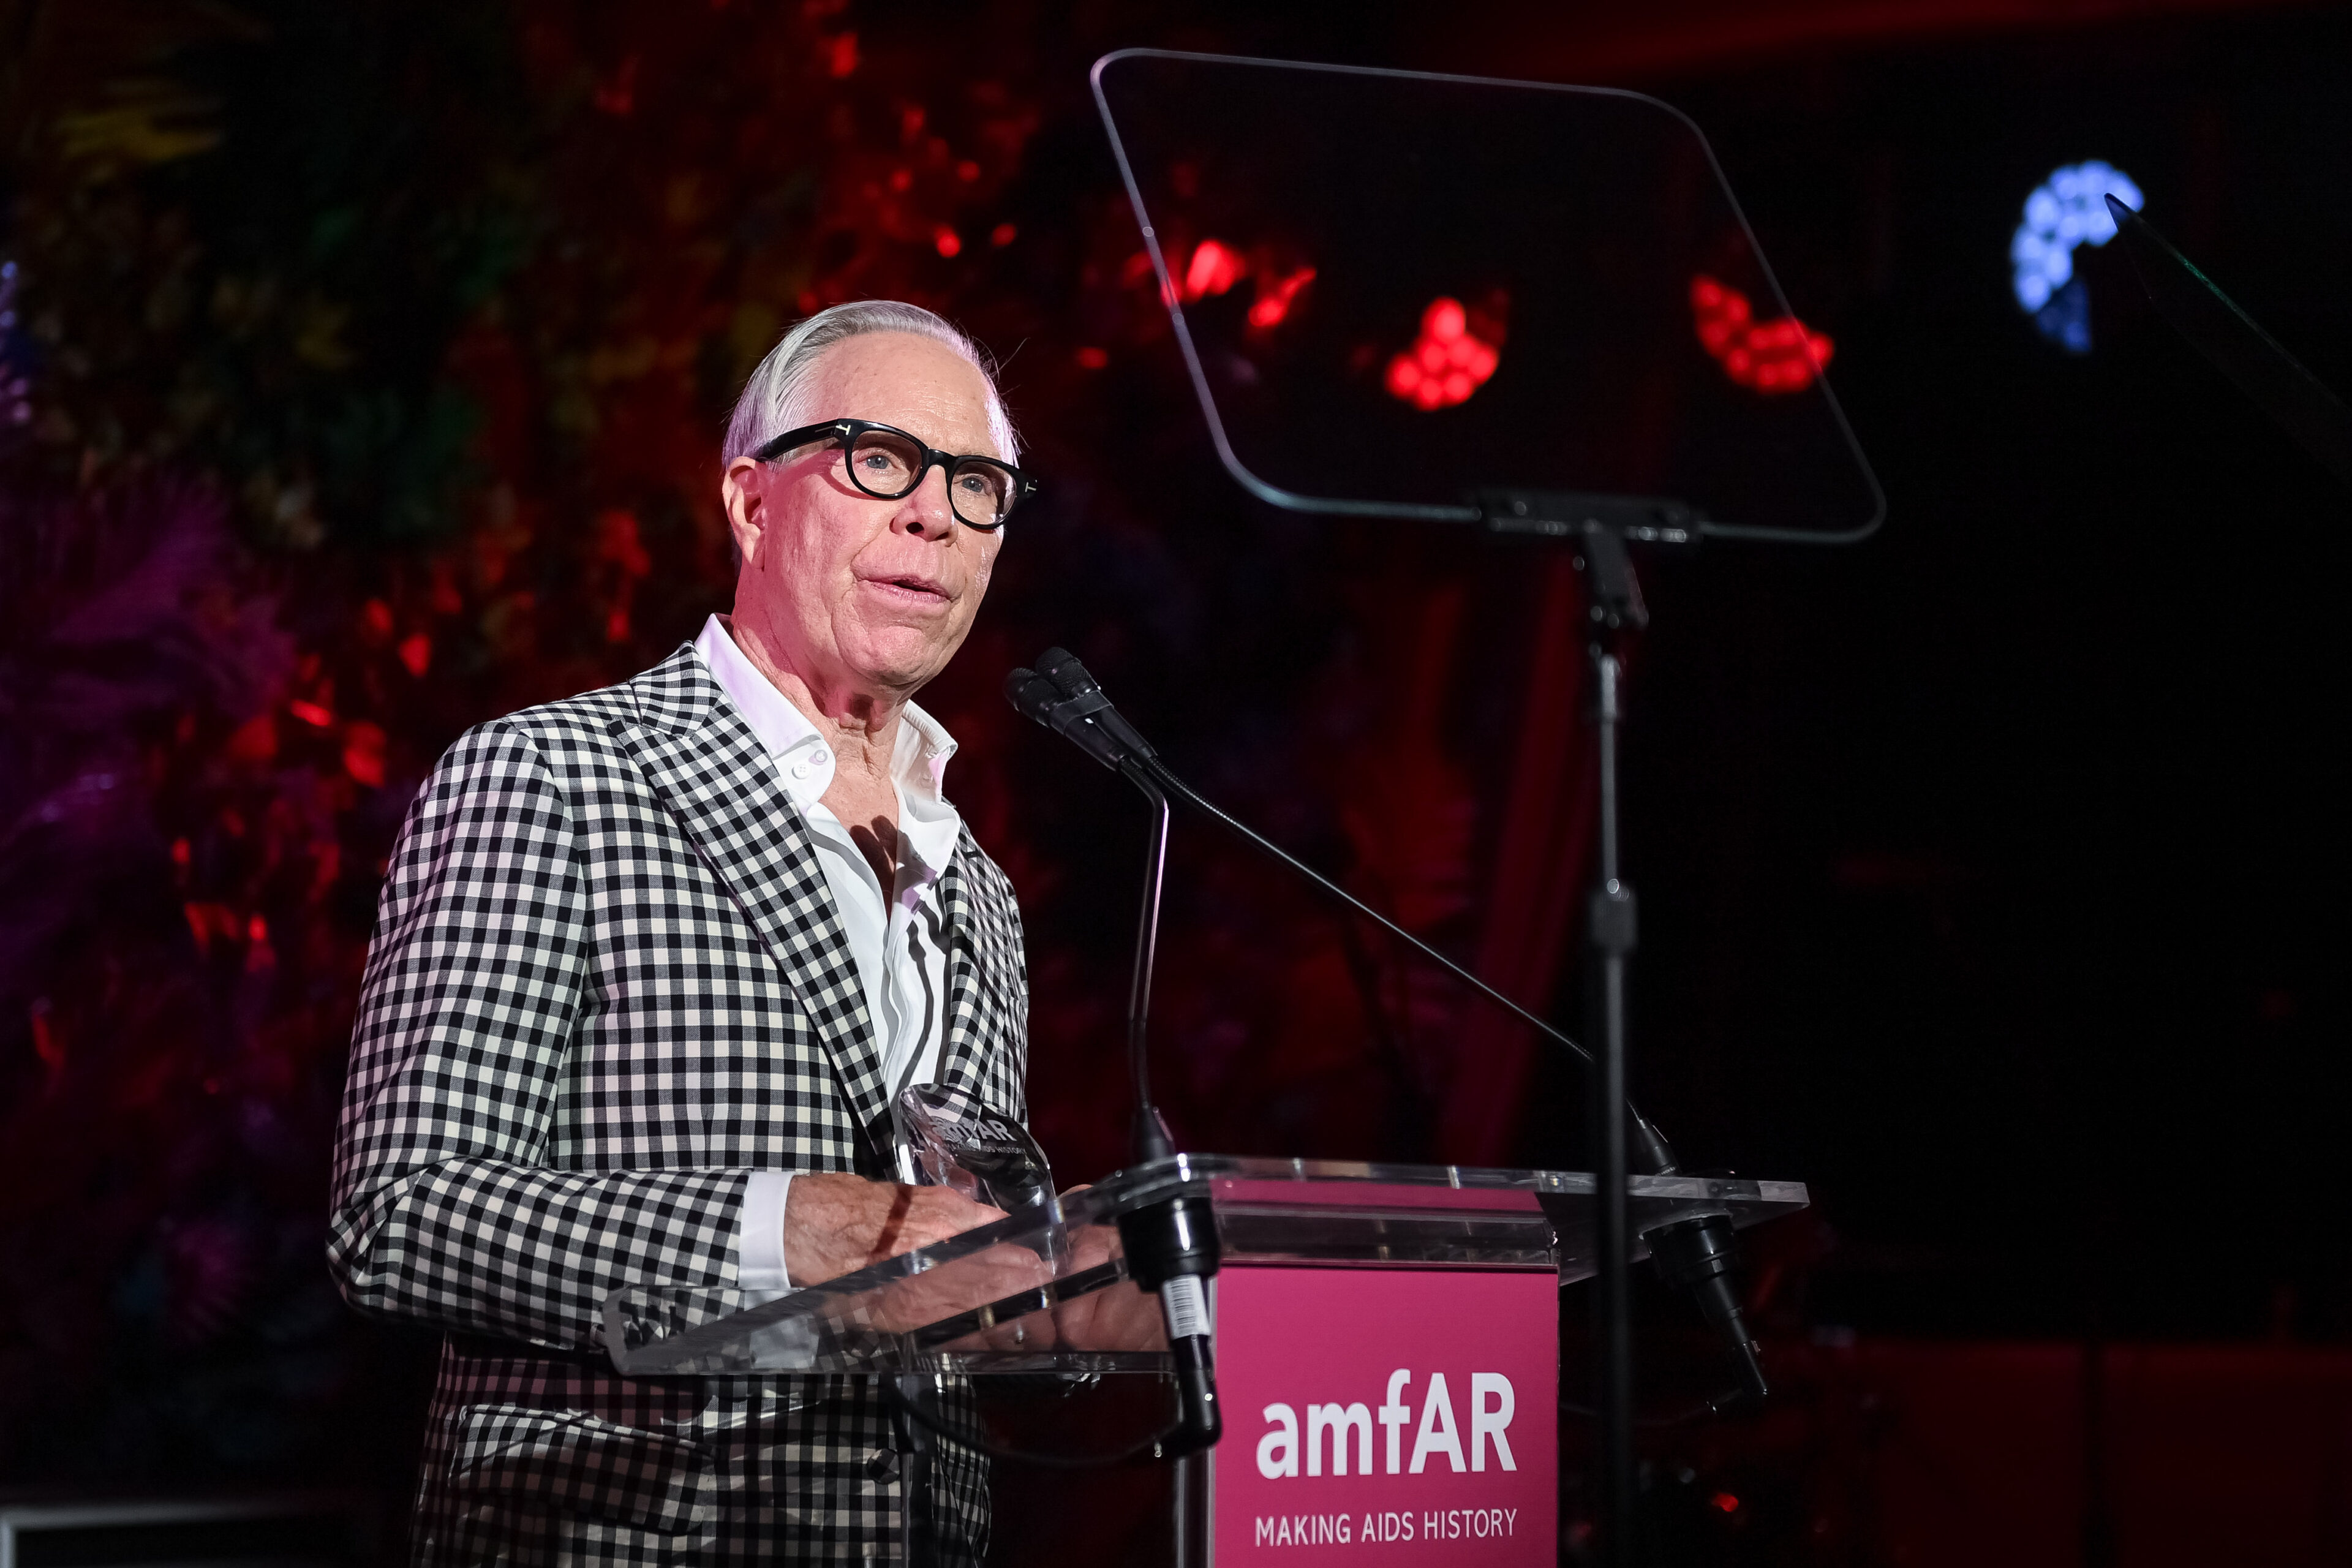 Honoree Tommy Hilfiger accepting award